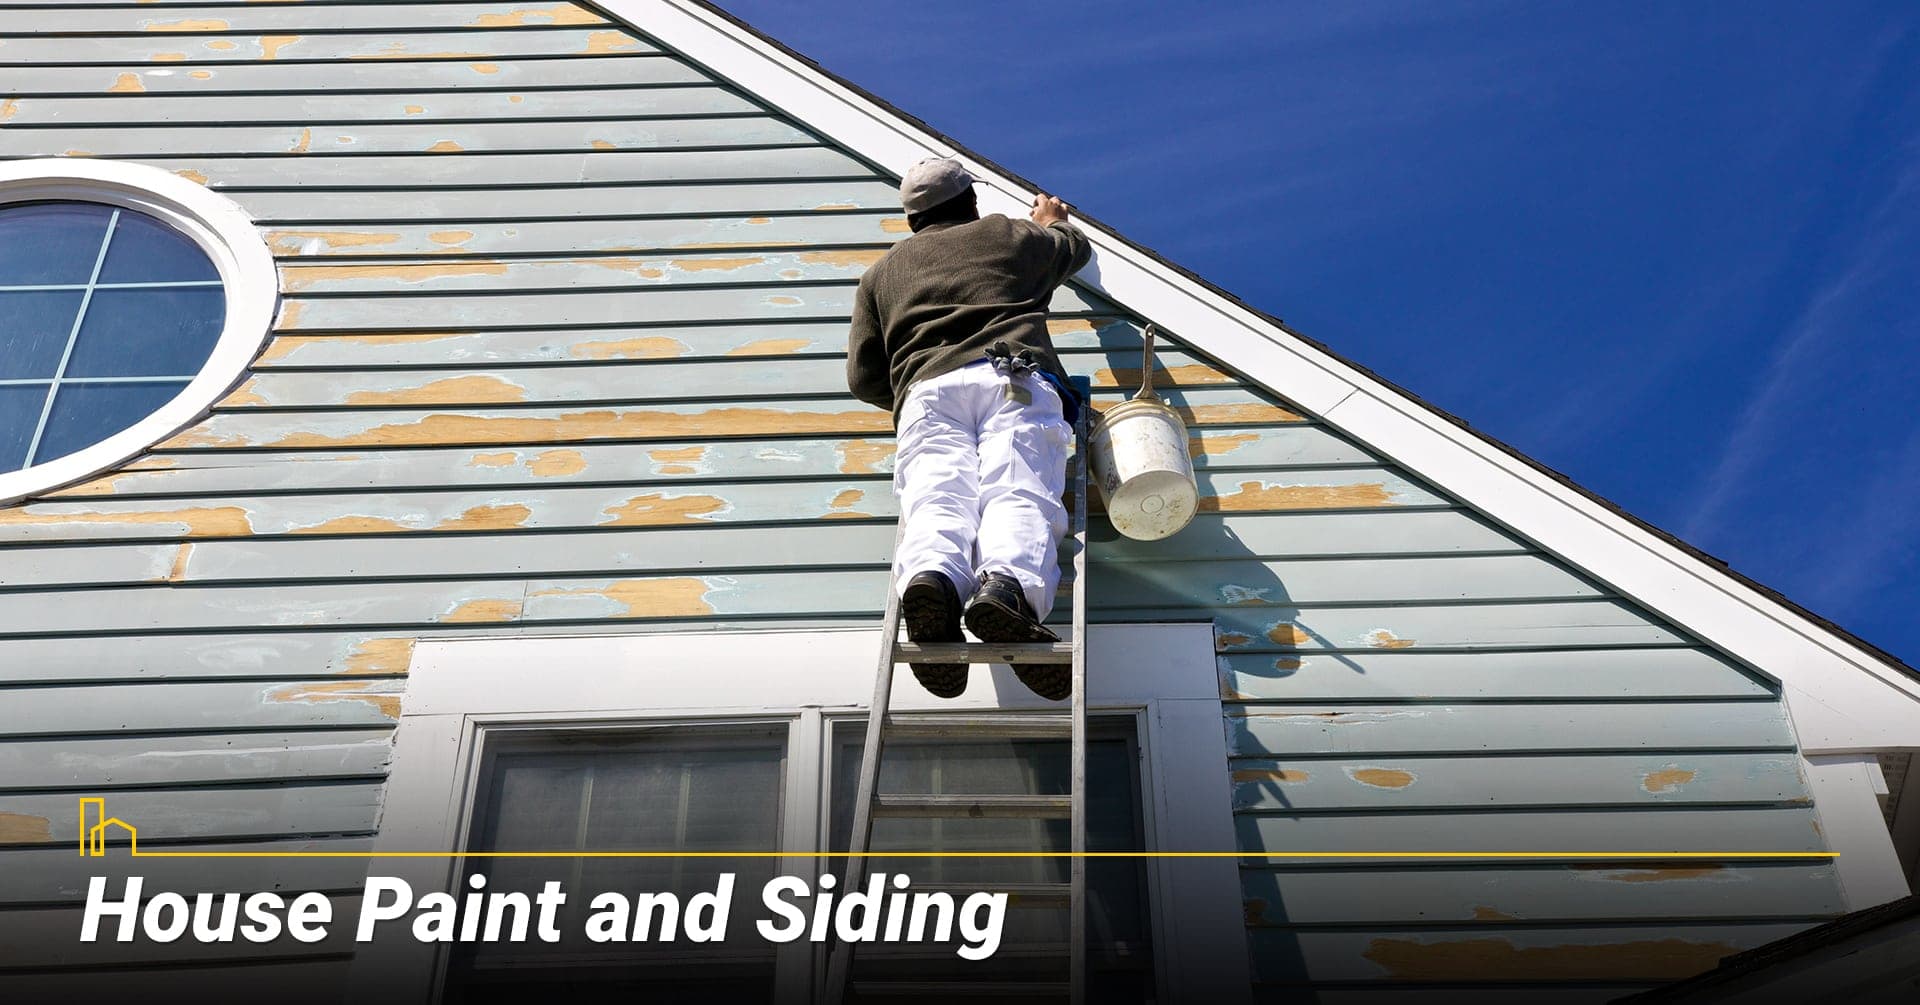 House Paint and Siding, give your siding a new coat of paint